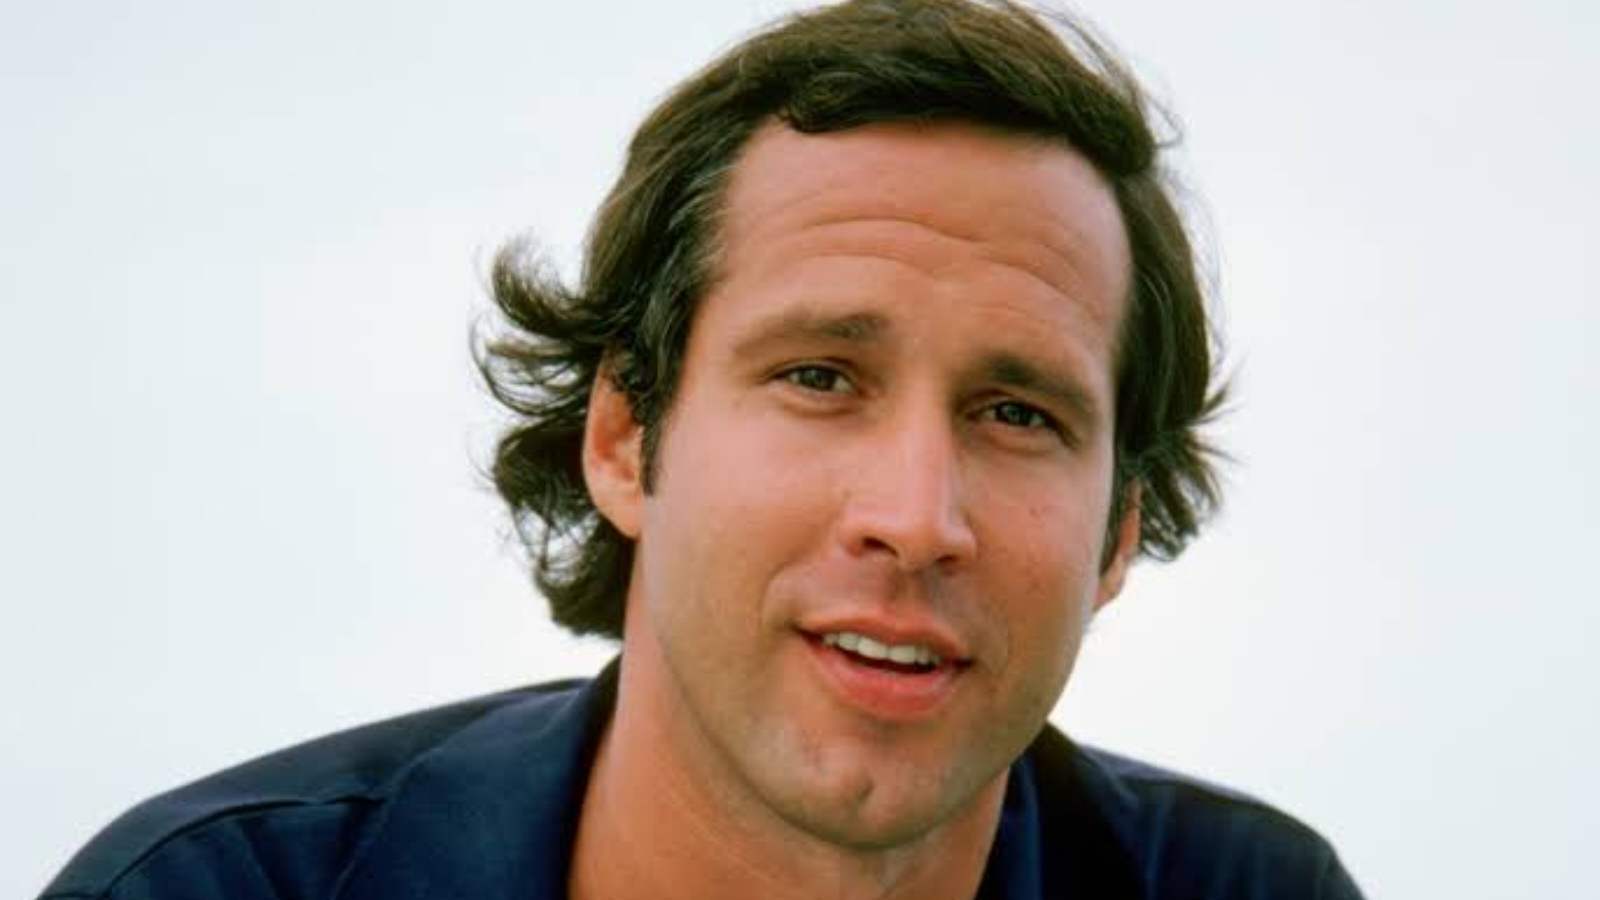 Chevy Chase in his early days